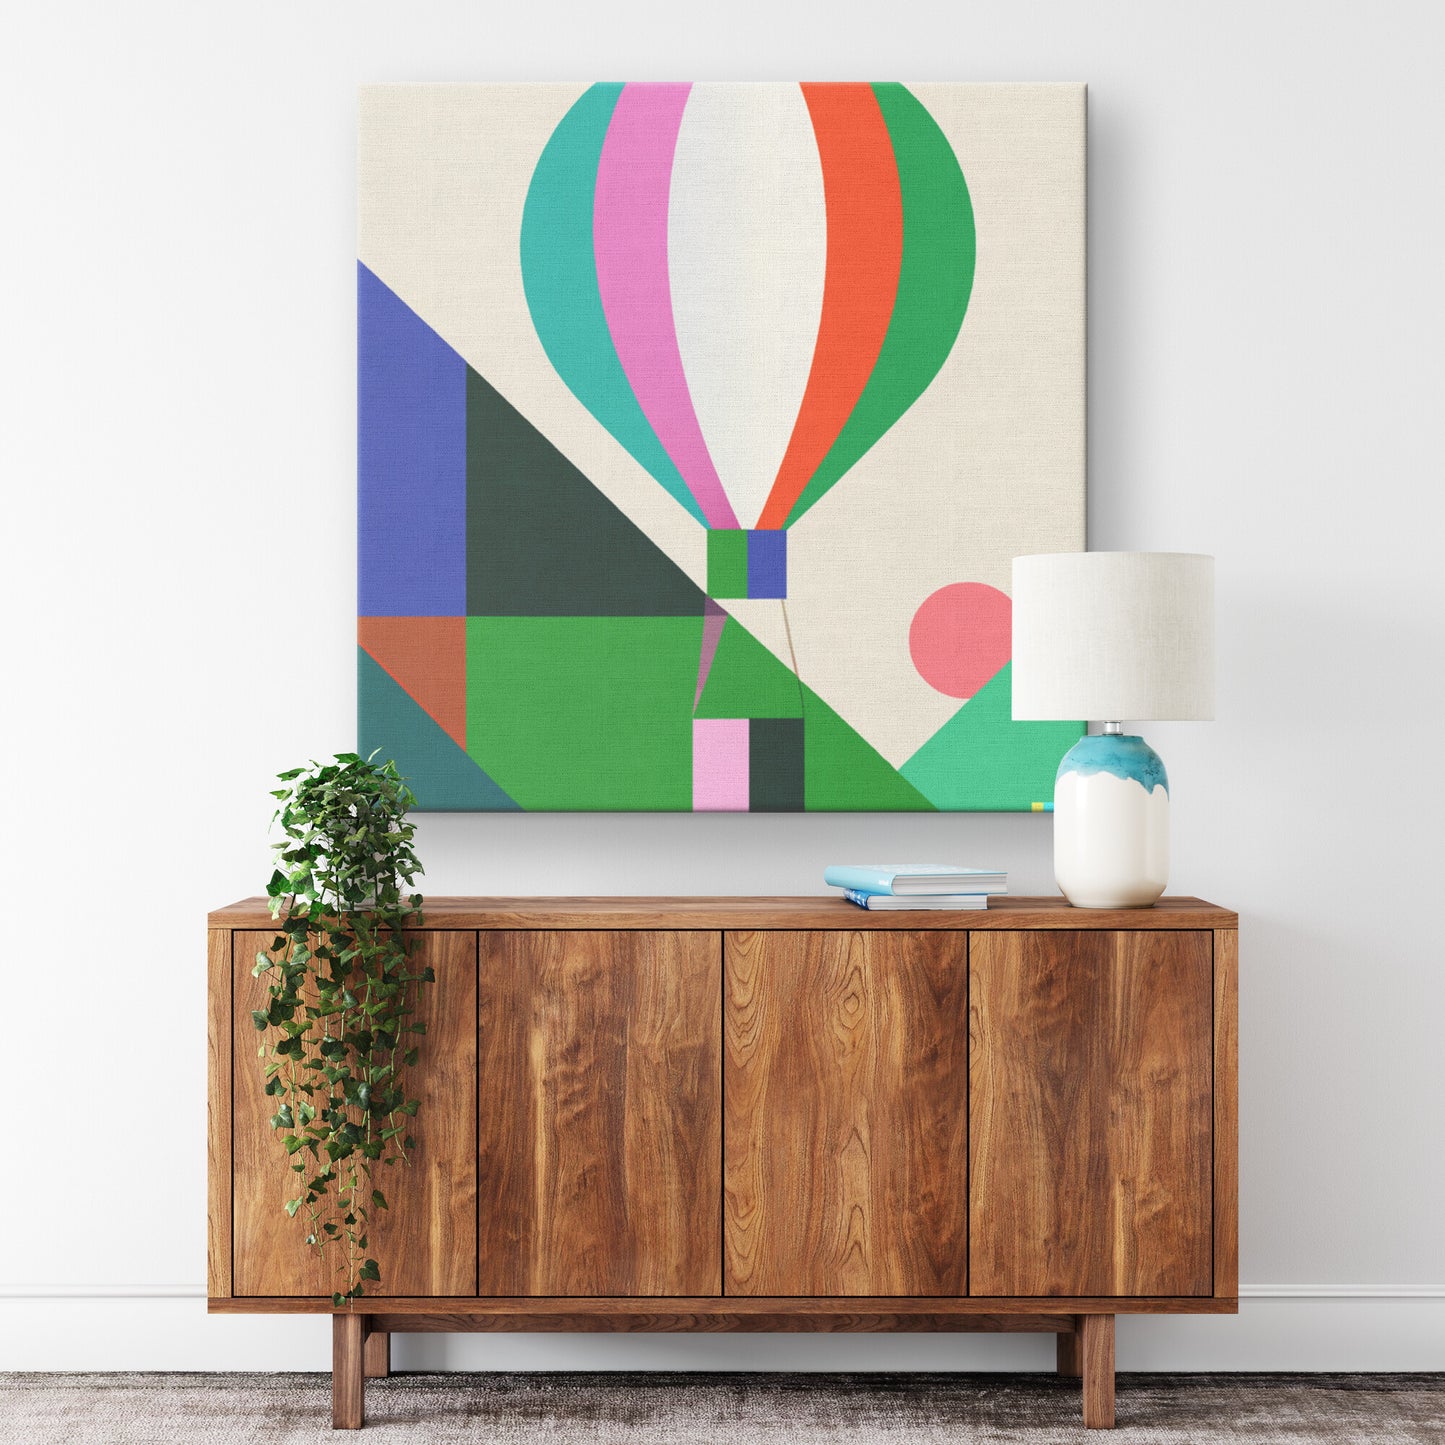 Abstract Painting of a Hot Air Balloon, One-Of-A-Kind and Backed by an NFT